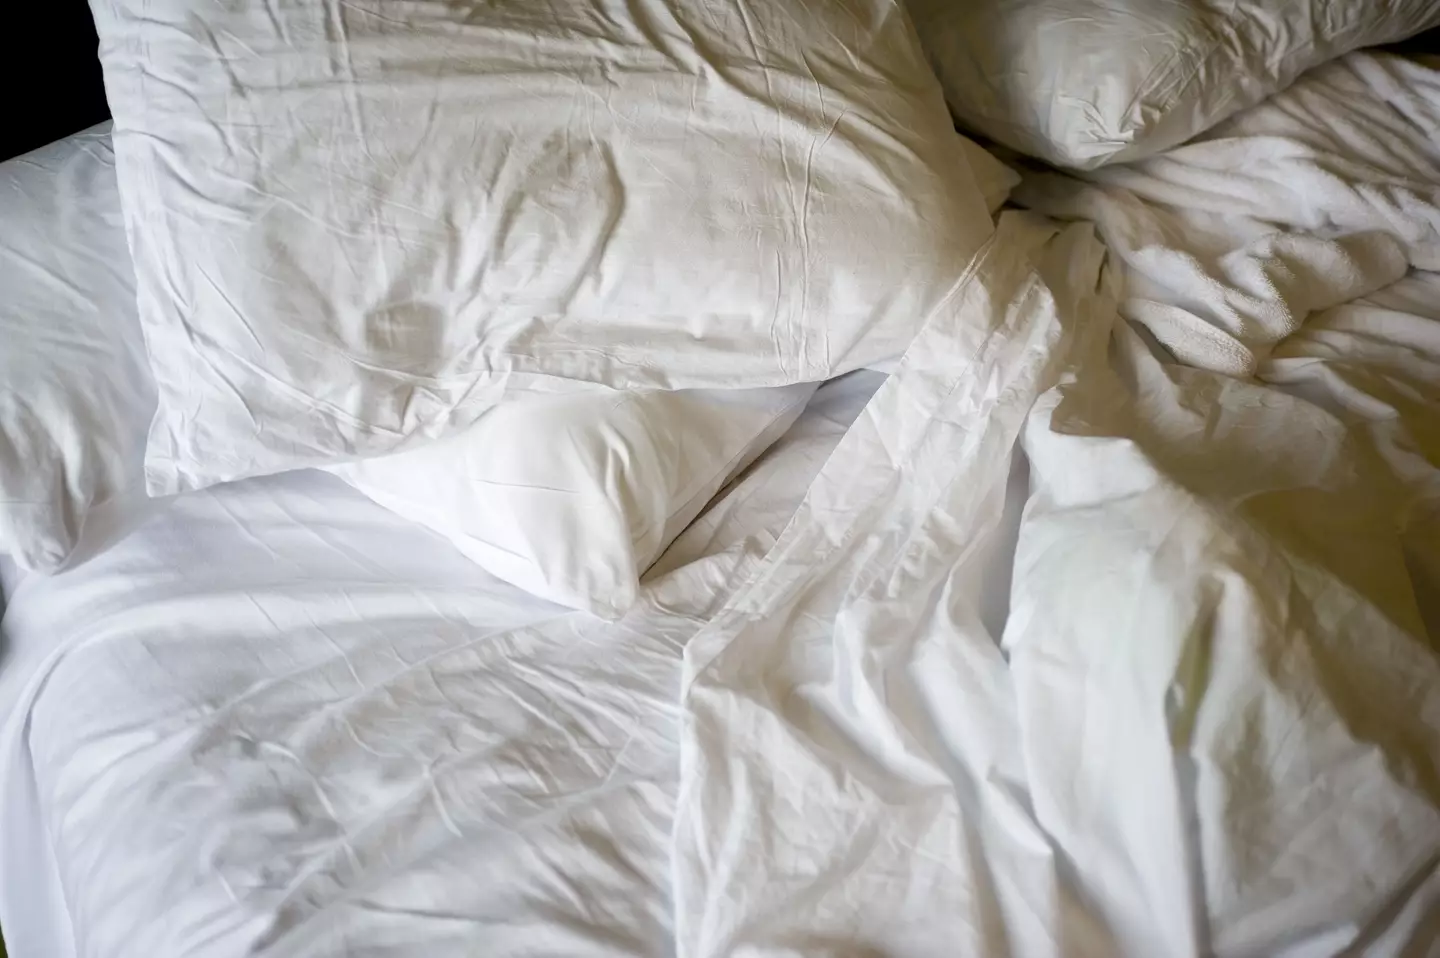 Changing the bed sheets can be a frustrating chore.